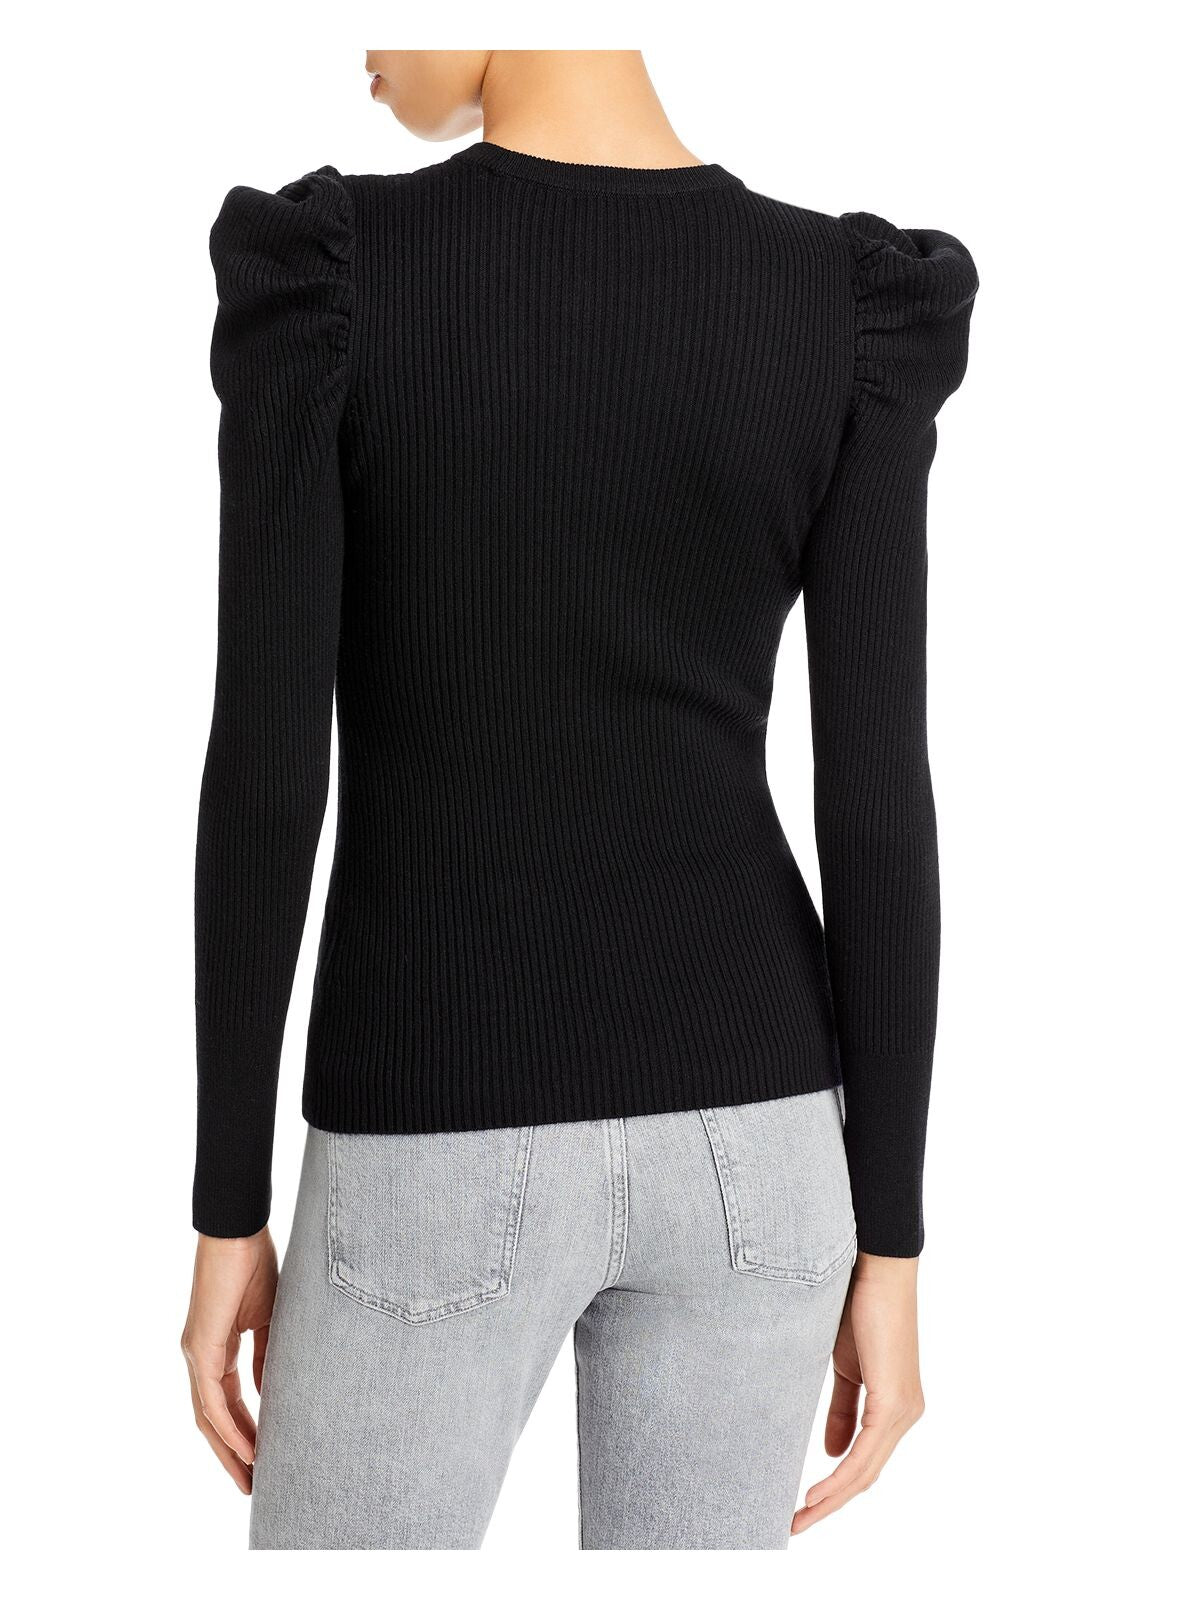 7 FOR ALL MANKIND Womens Black Ribbed Ruffled Pouf Sleeve Crew Neck Sweater L